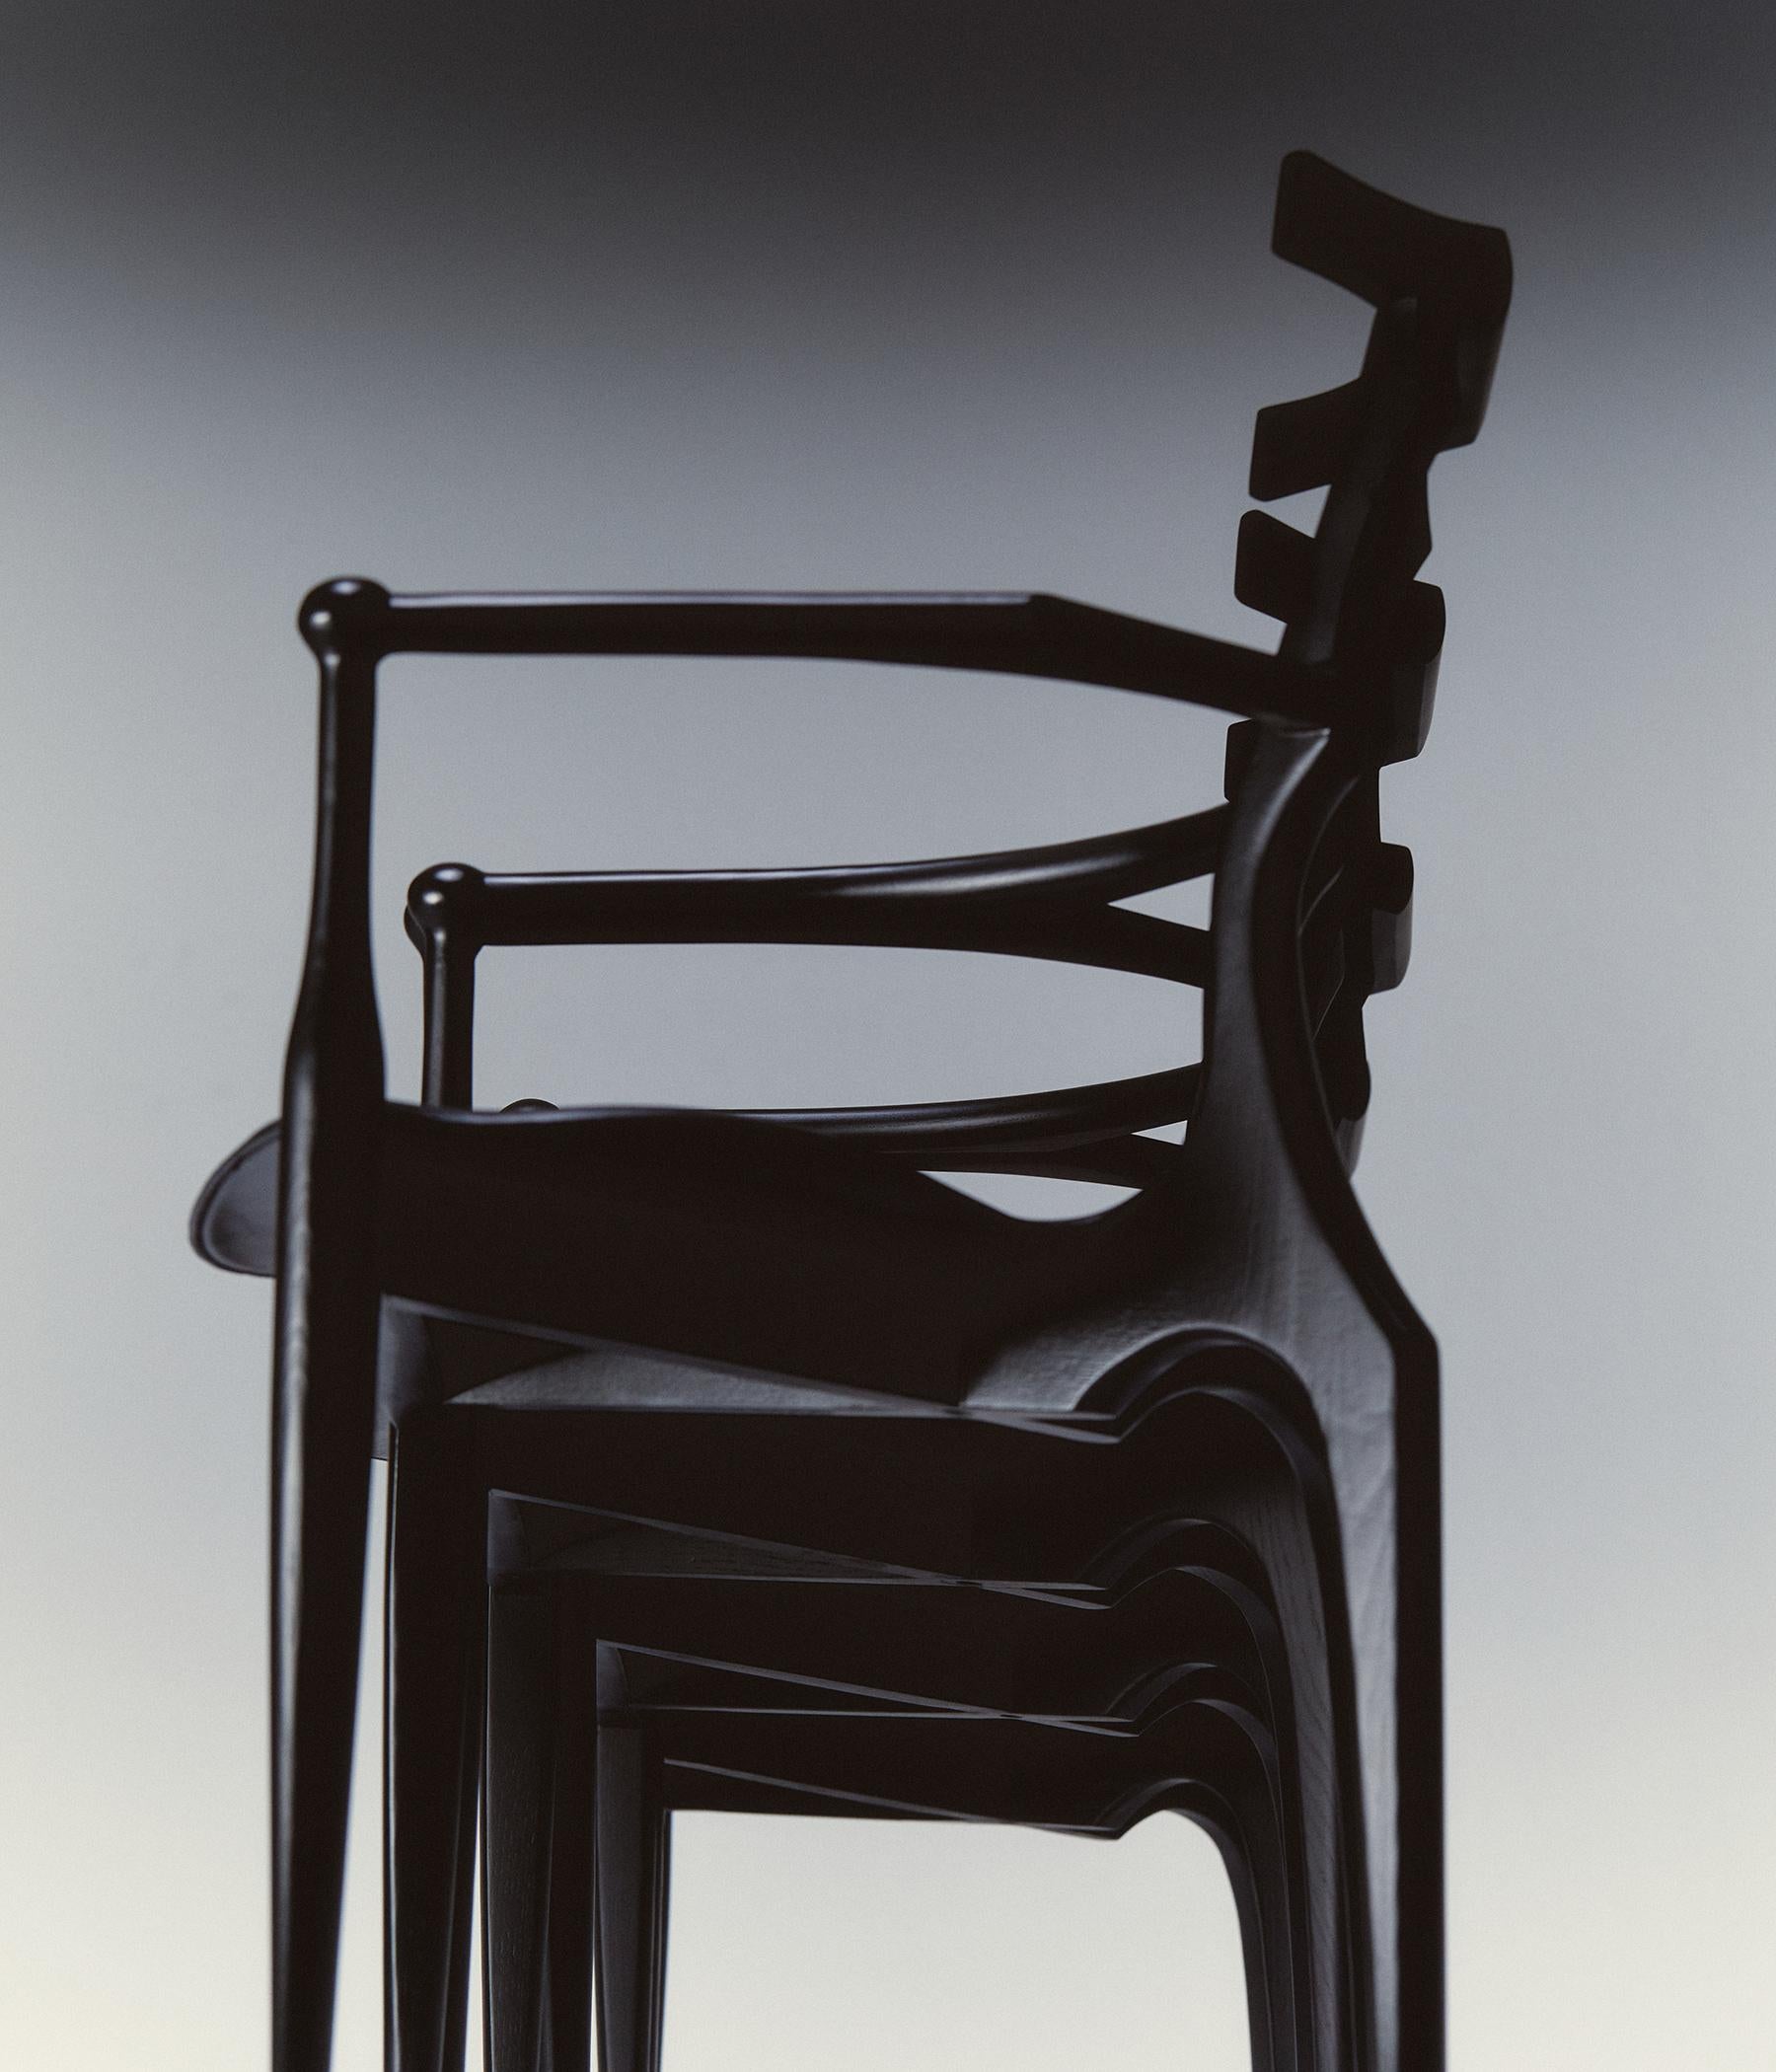 Gaulino chair by Oscar Tusquets ash wood black lacquer leather hide seat, Spain For Sale 5